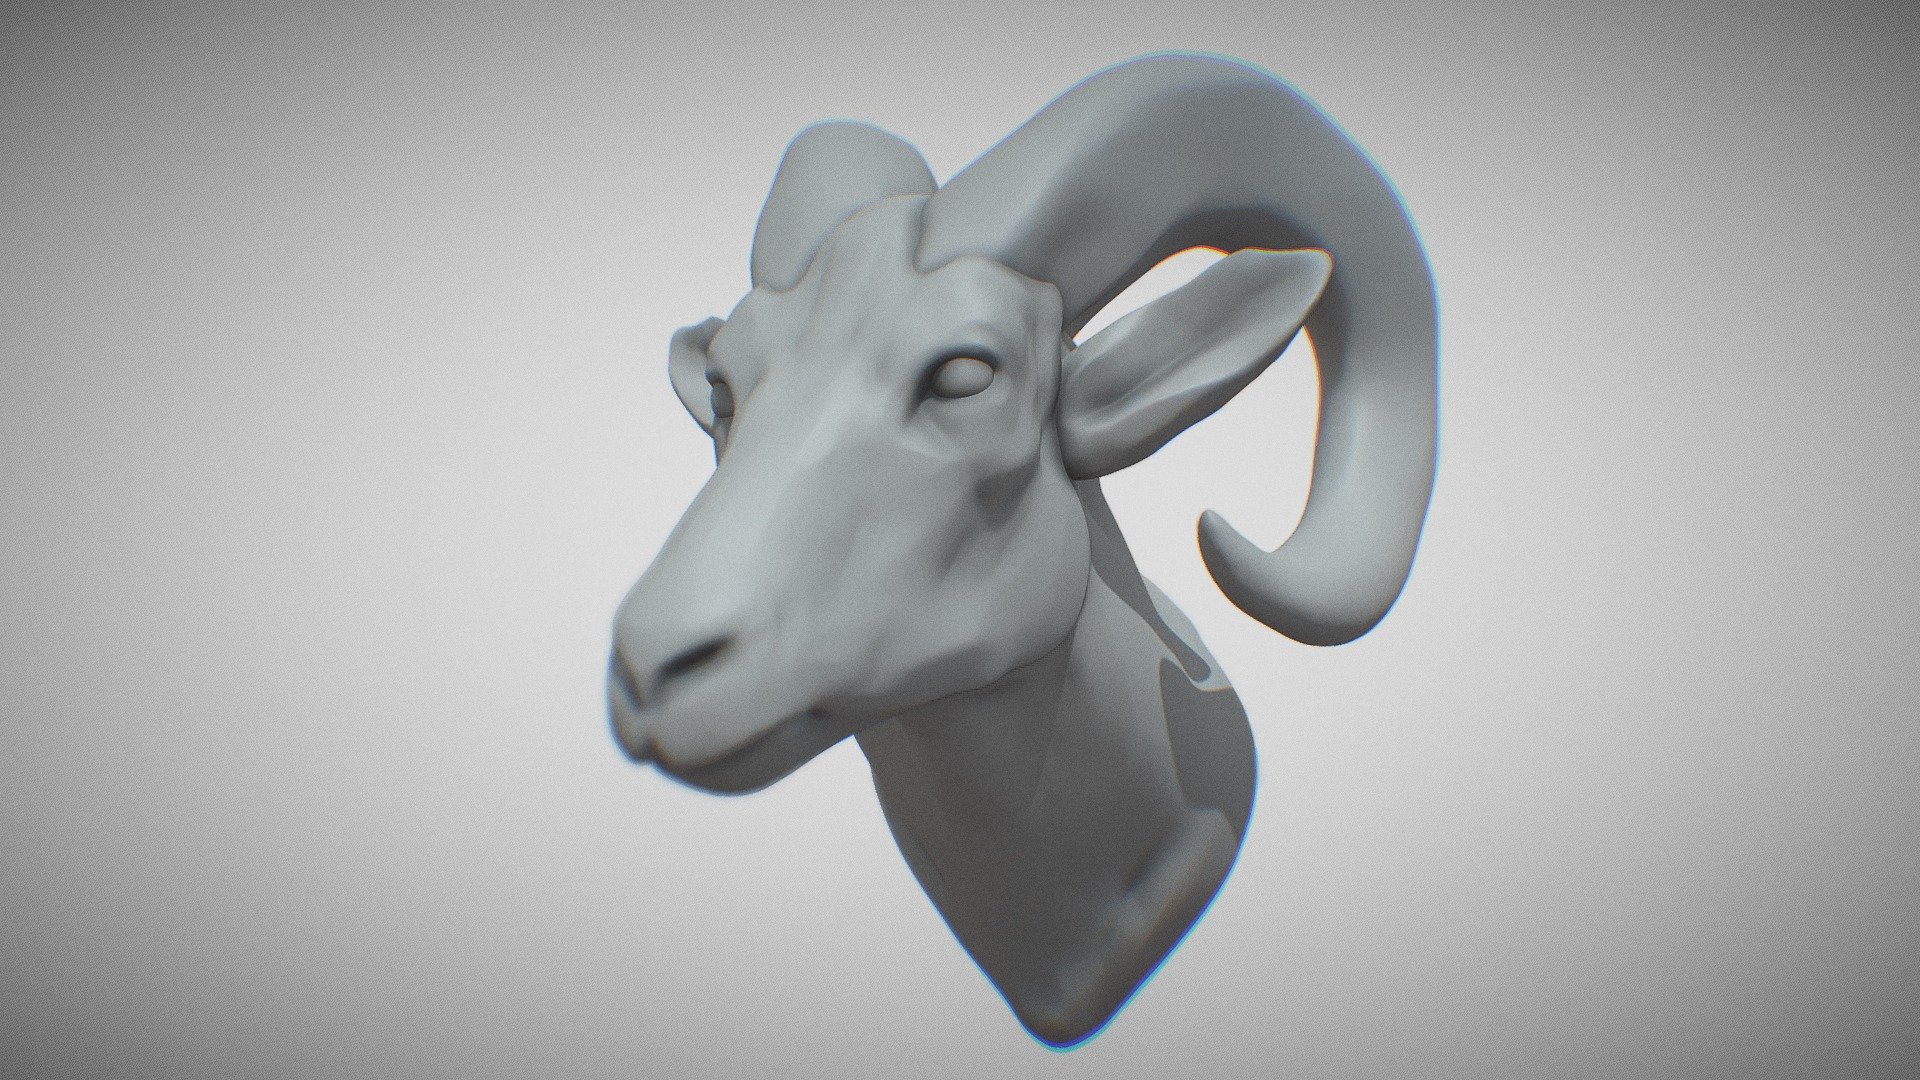 A horned sheep/ram bust. Started in Blender but re-sculpted and decimated using ZBrush. Polypaint and texturing update coming soon.

see more of my work on my website and instagram:

https://www.tomjohnsonart.co.uk/

https://www.instagram.com/tomjohnsonart/ - Horned Sheep - Buy Royalty Free 3D model by Tom Johnson (@Brigyon) 3d model